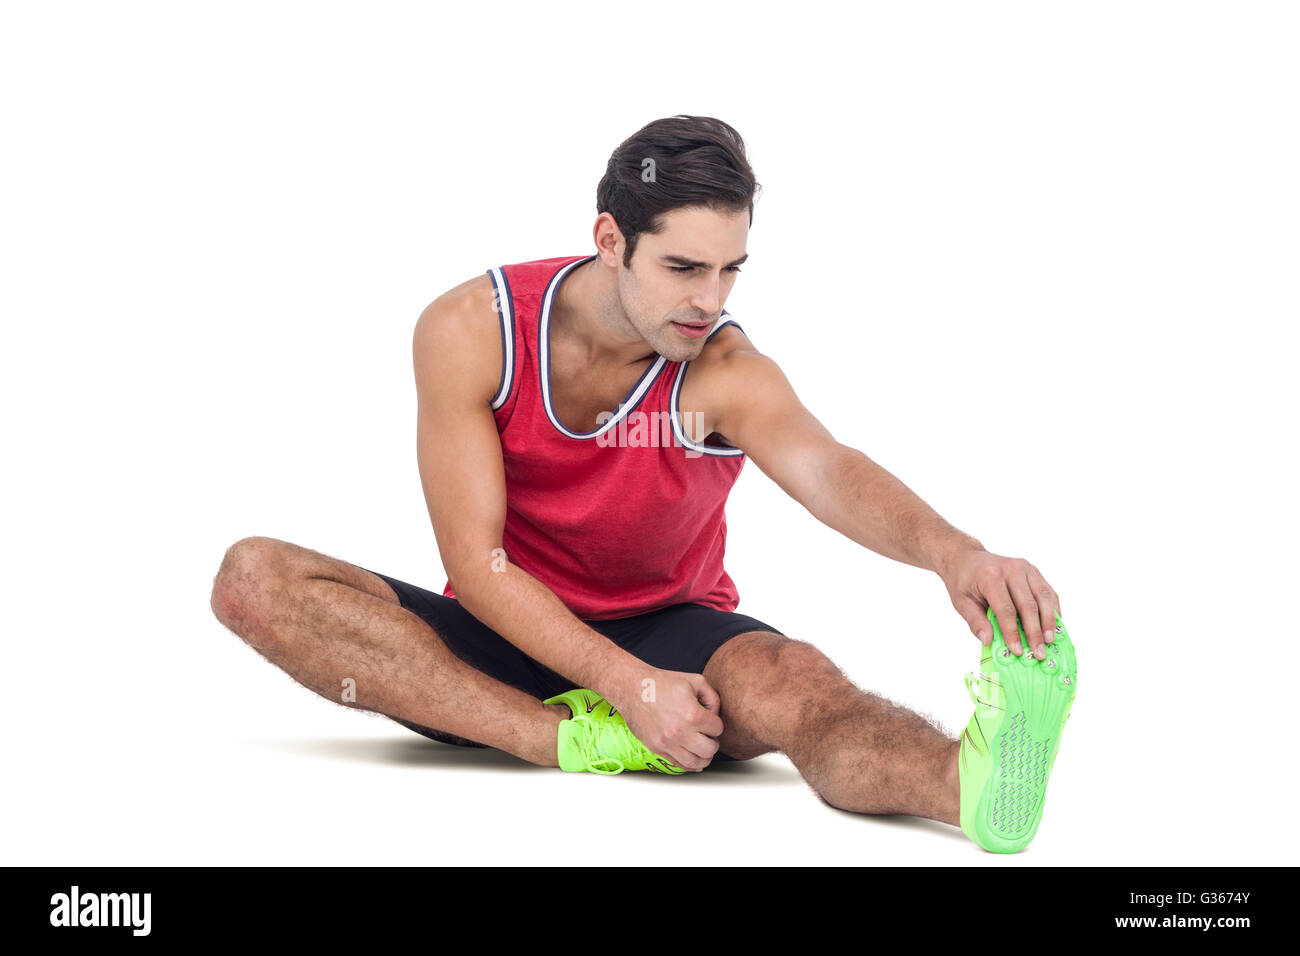 Male athlete stretching his hamstring Stock Photo